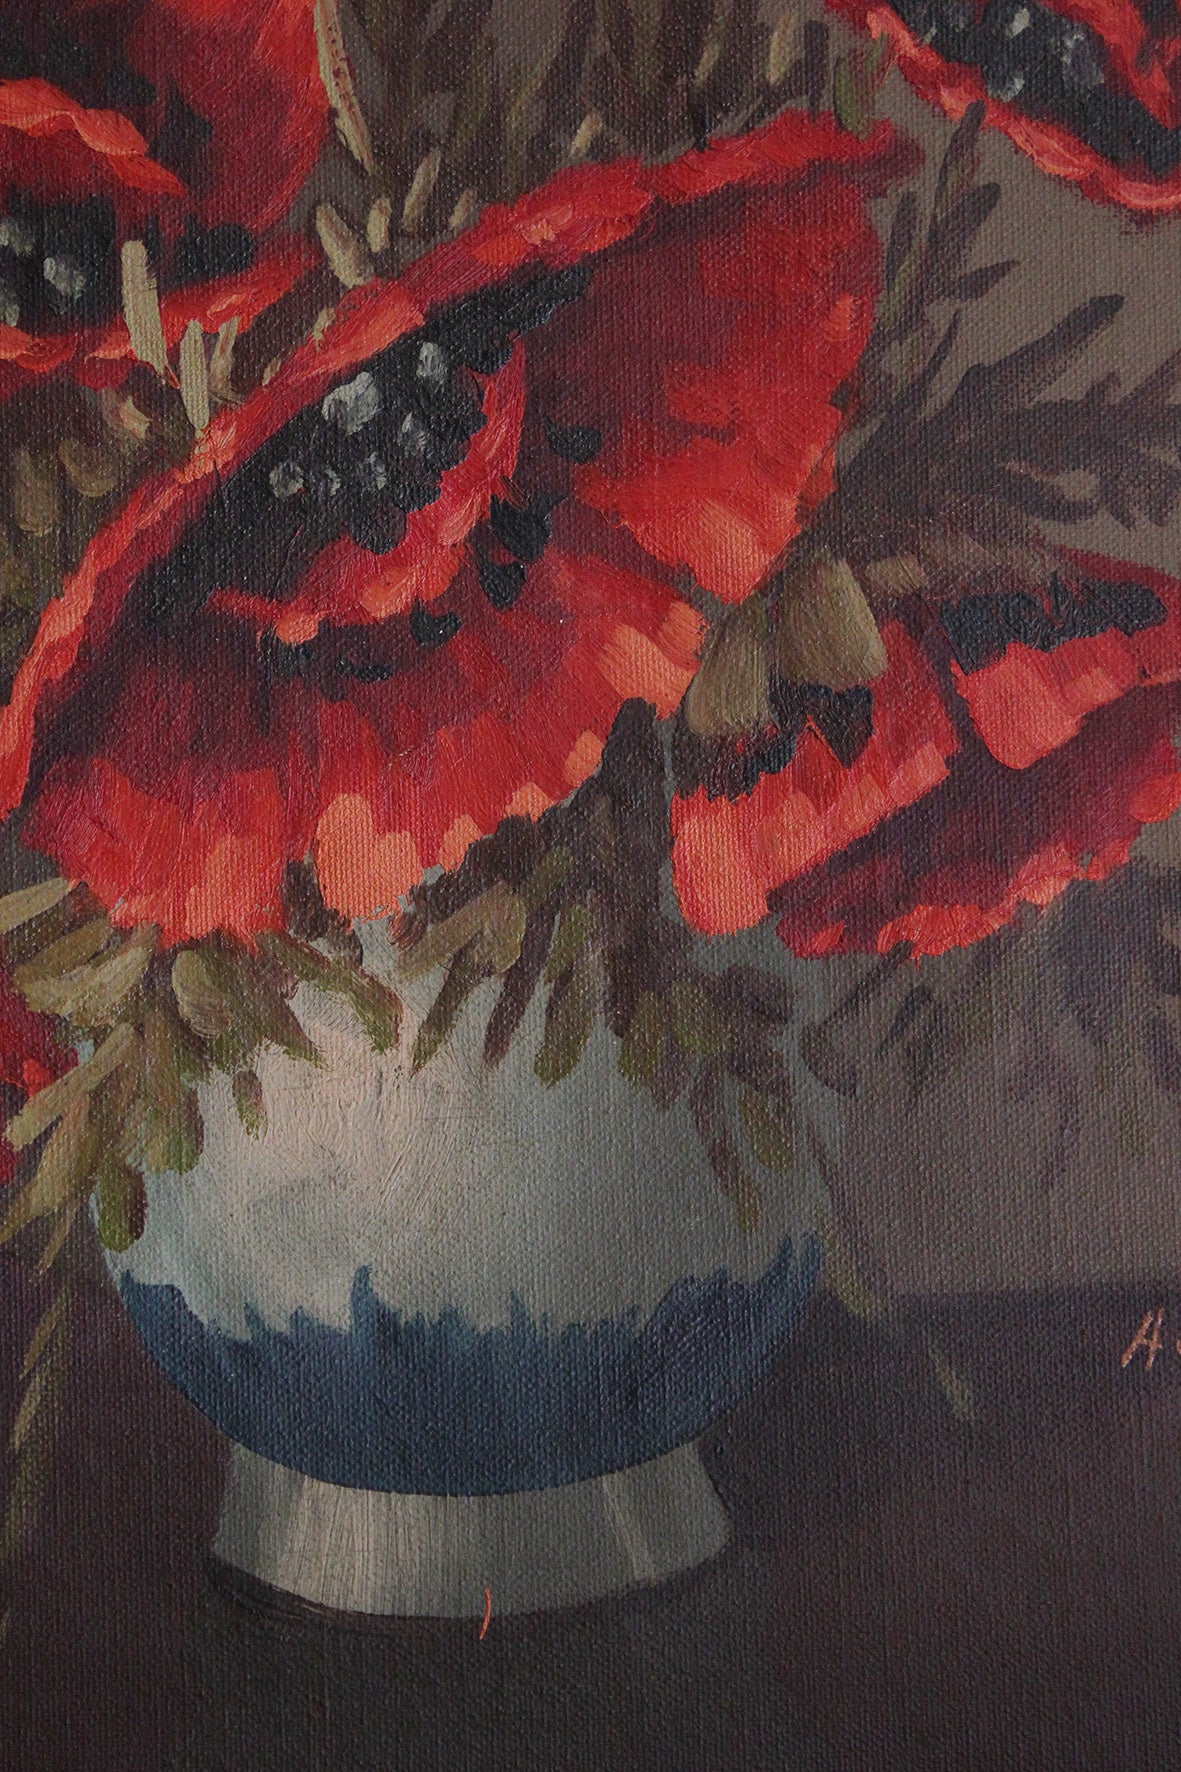 Old Oil Painting on Canvas - Poppies in Blue Vase